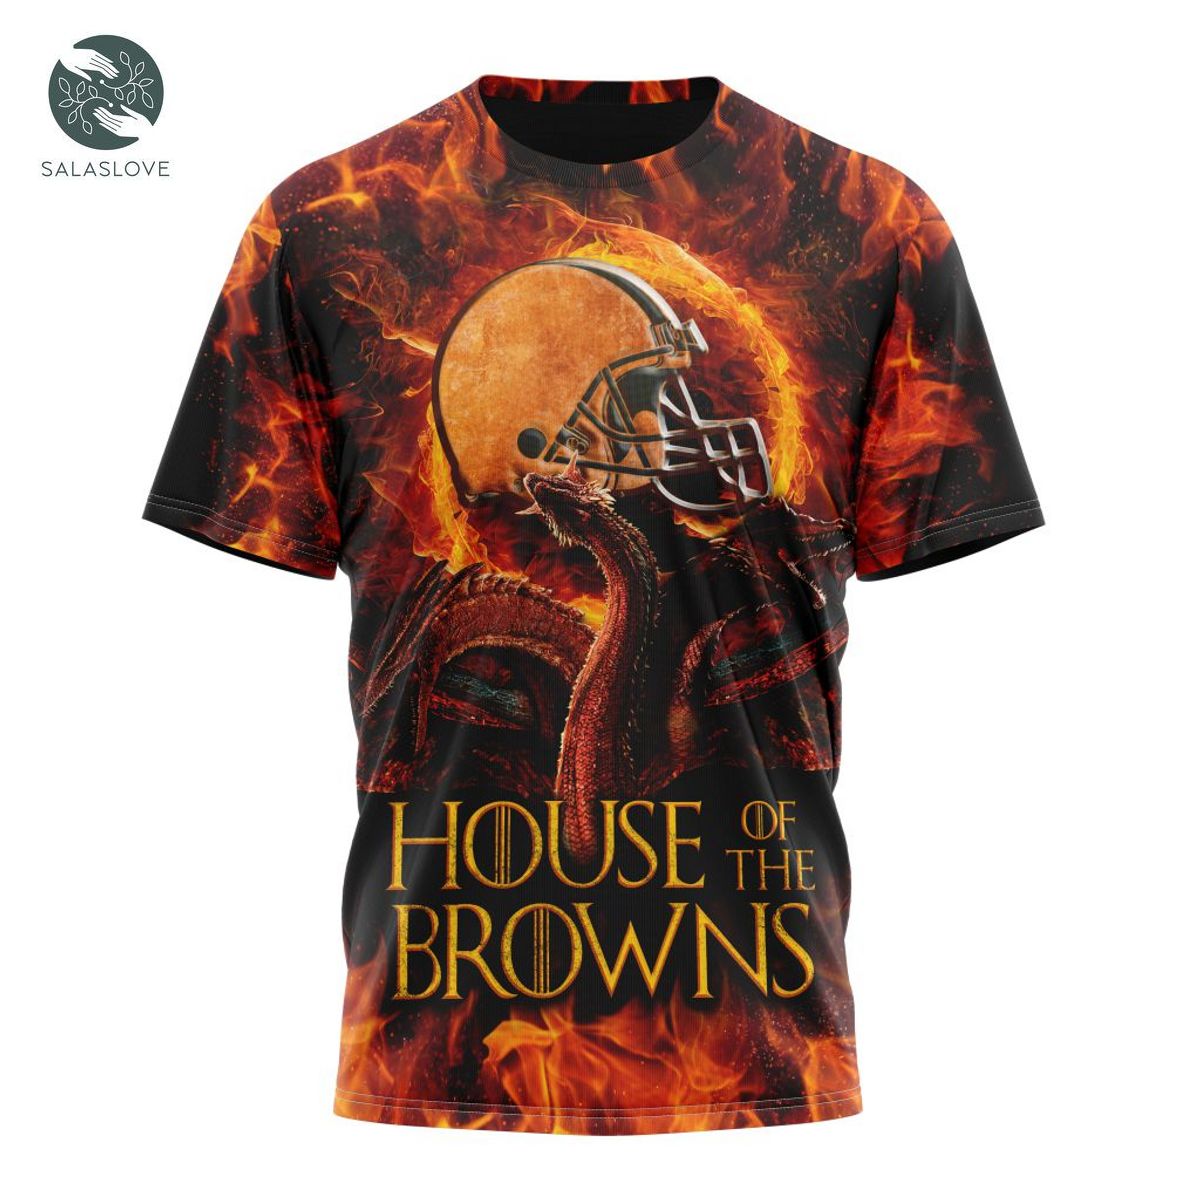 NFL Cleveland Browns GAME OF THRONES – HOUSE OF THE BROWNS Shirt